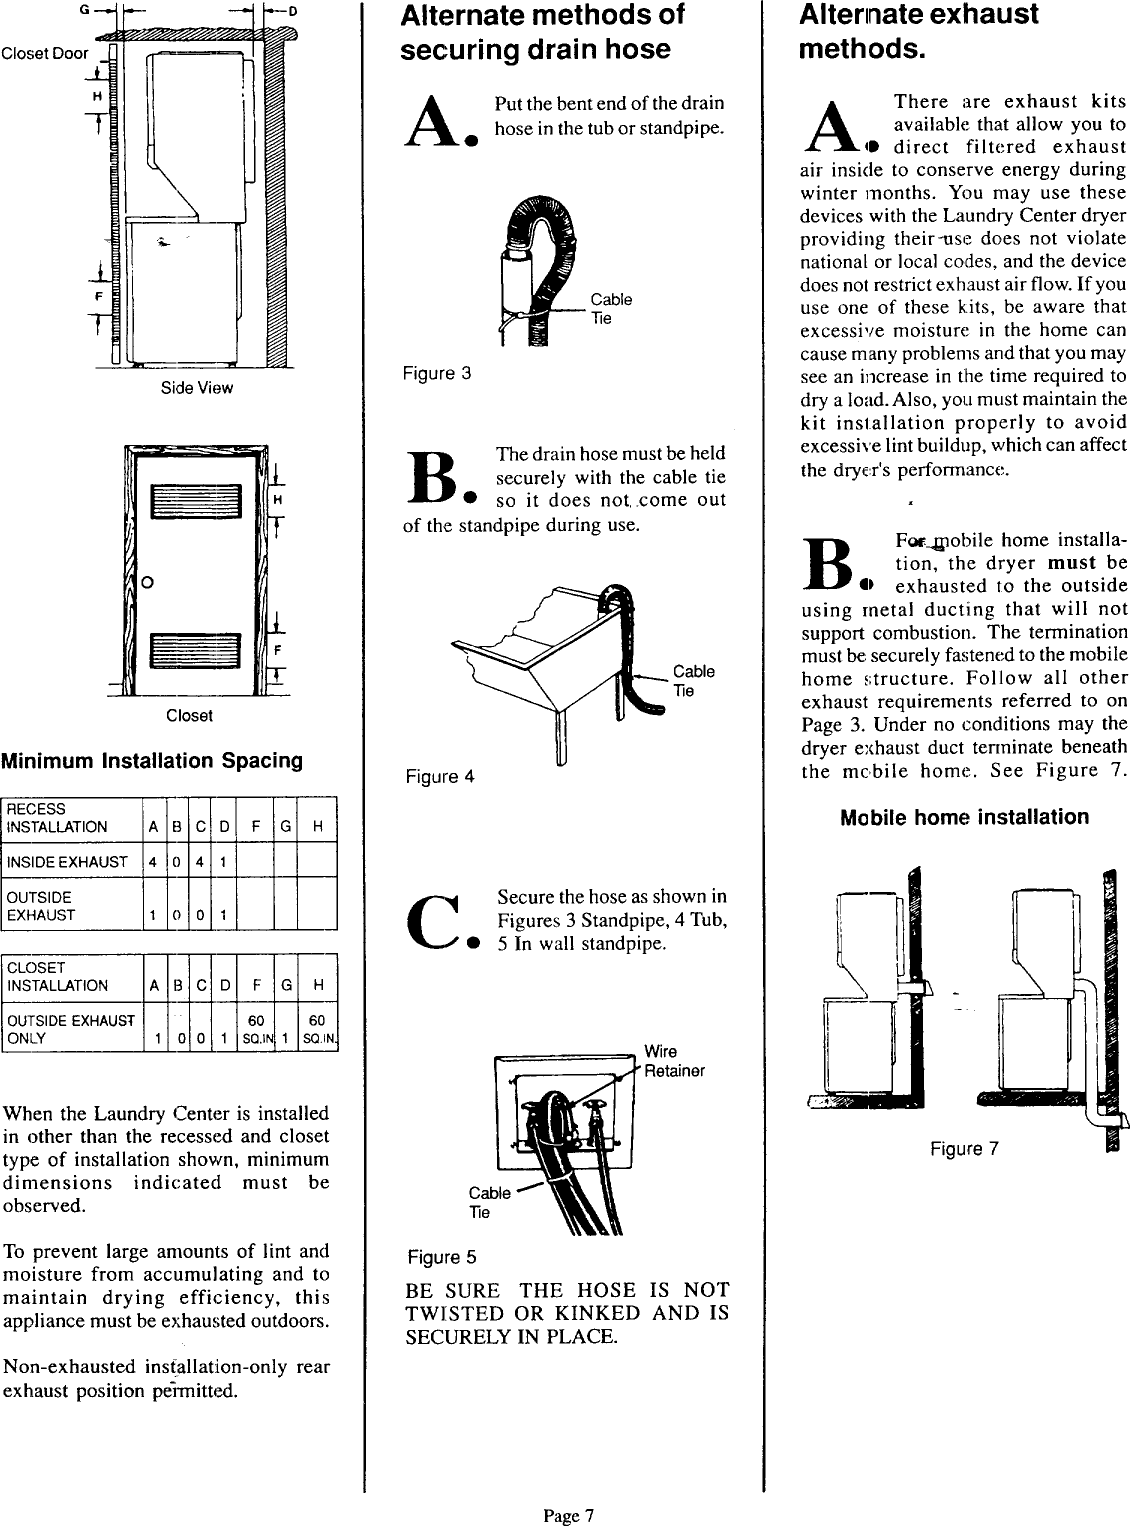 Page 7 of 9 - KENMORE  Laundry Centers Manual 98010139